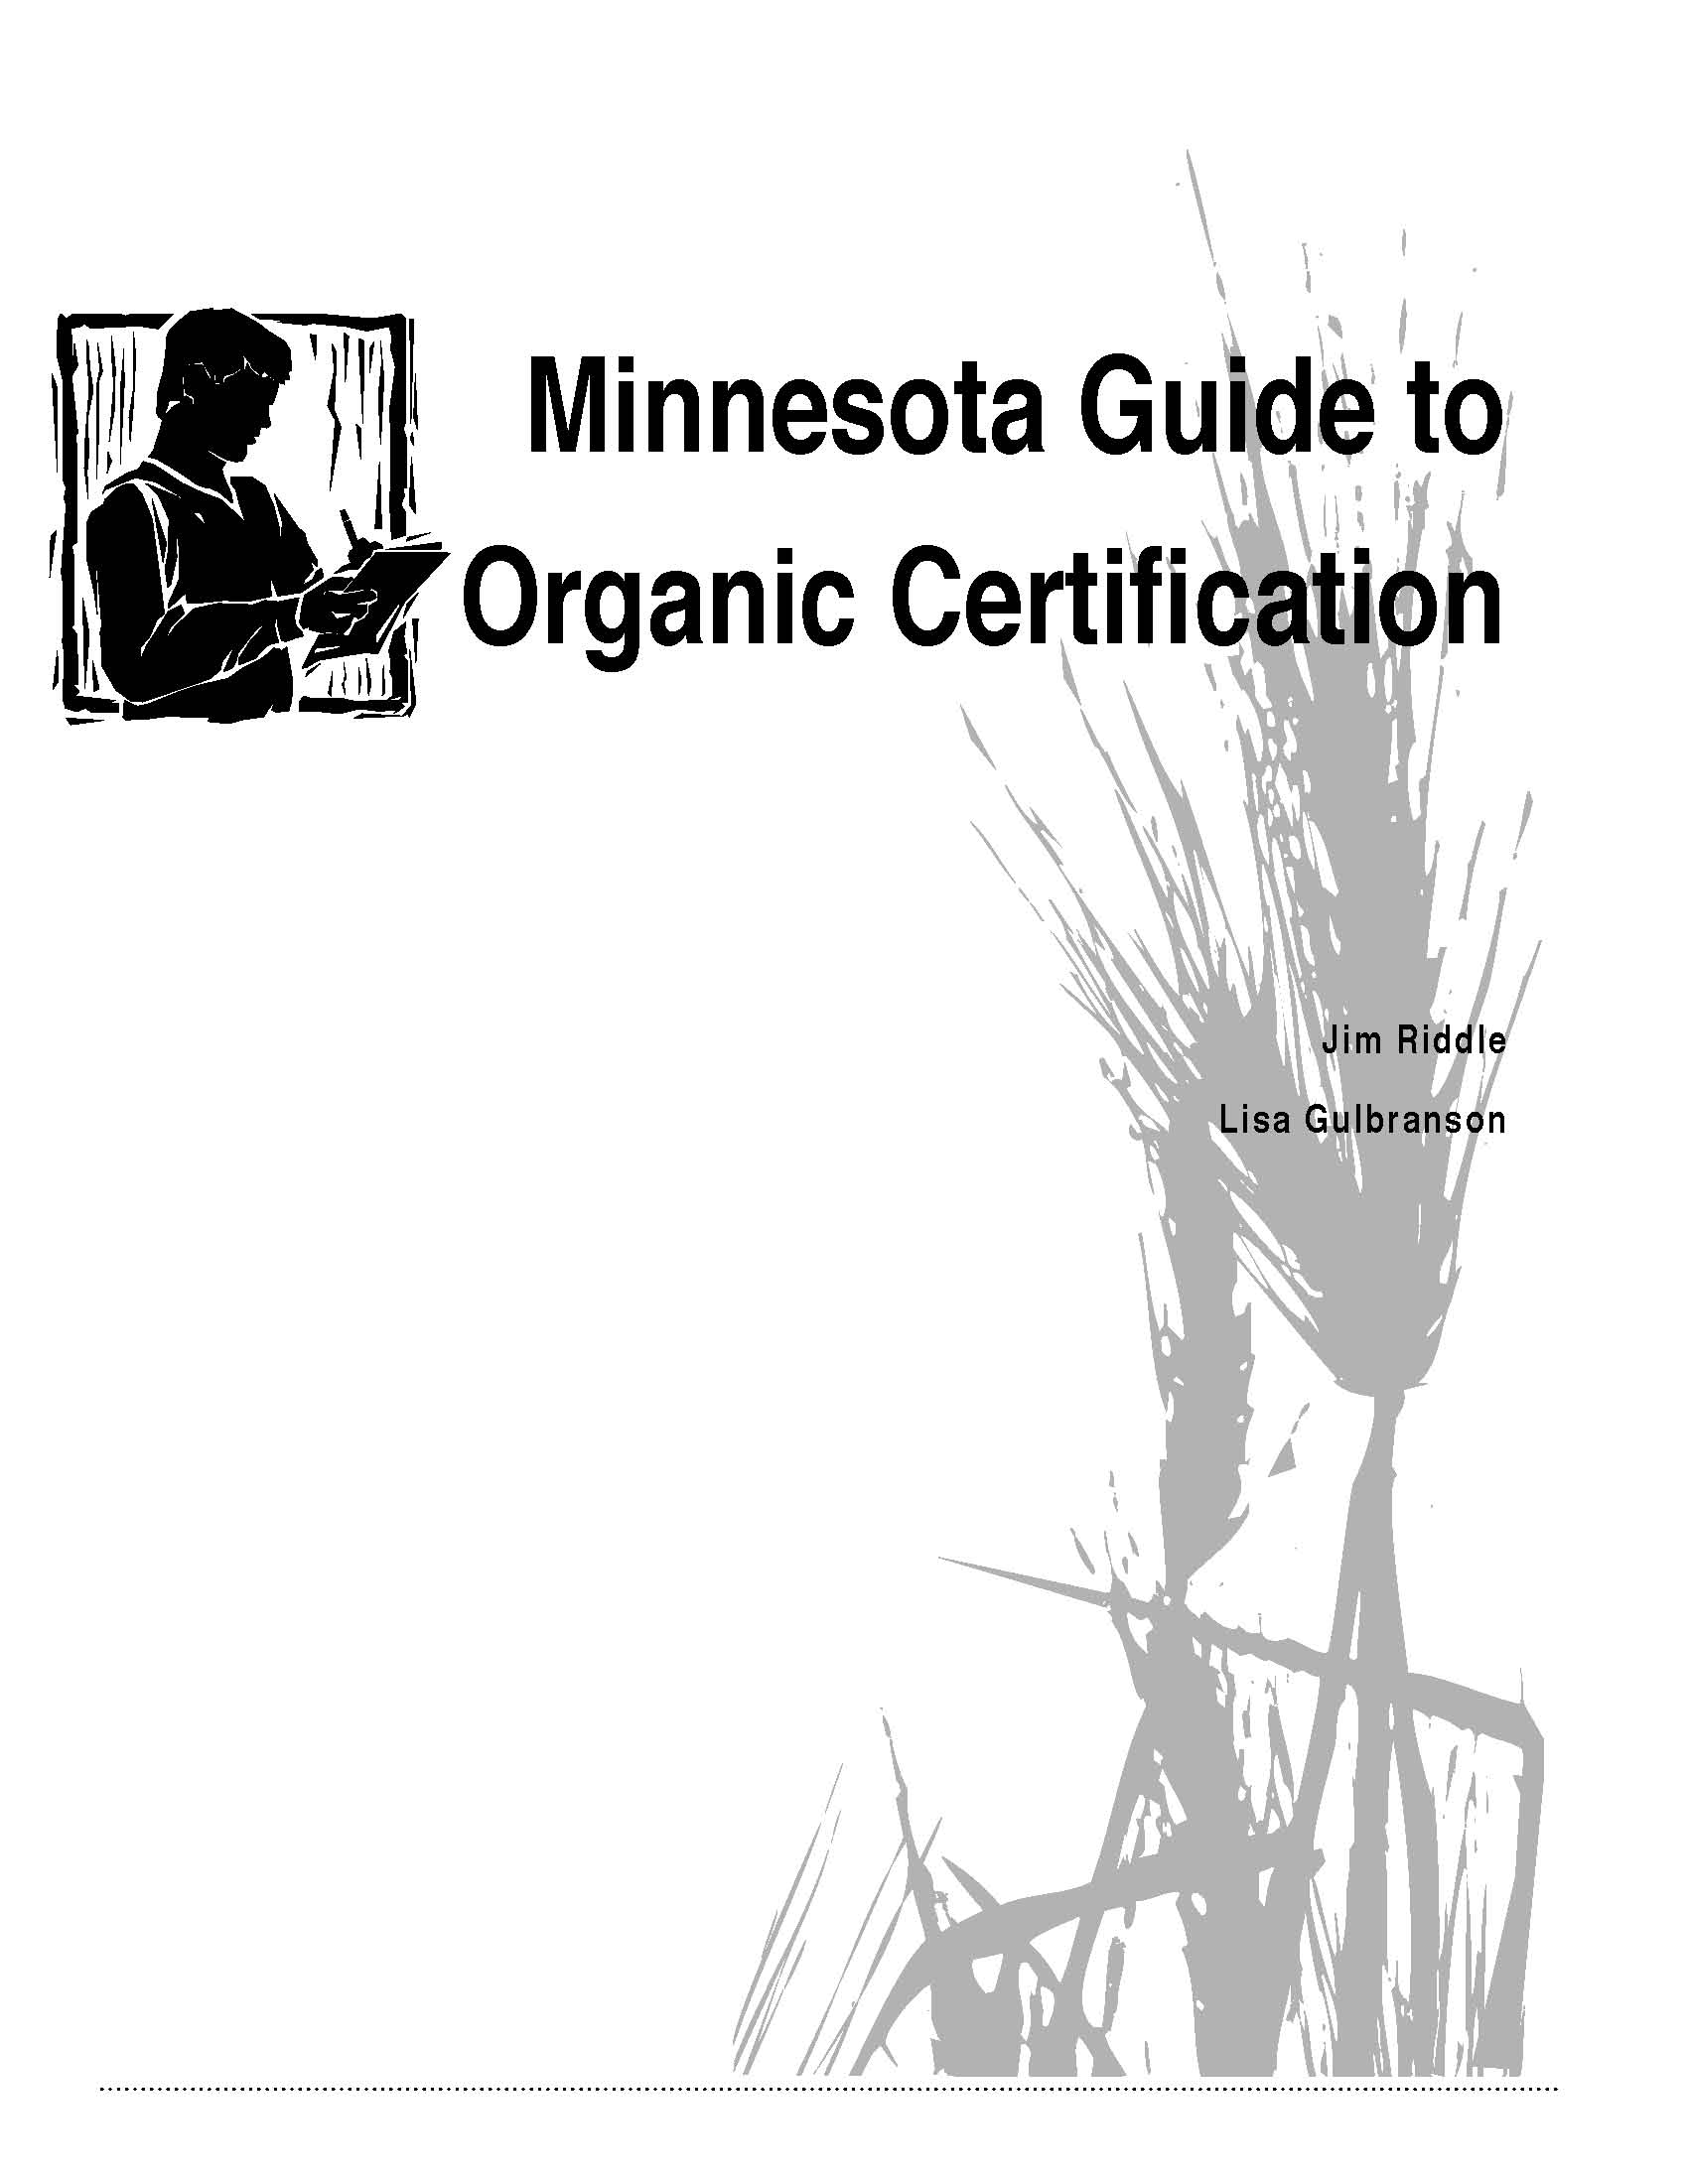 MN Guide to Organic Certification Image